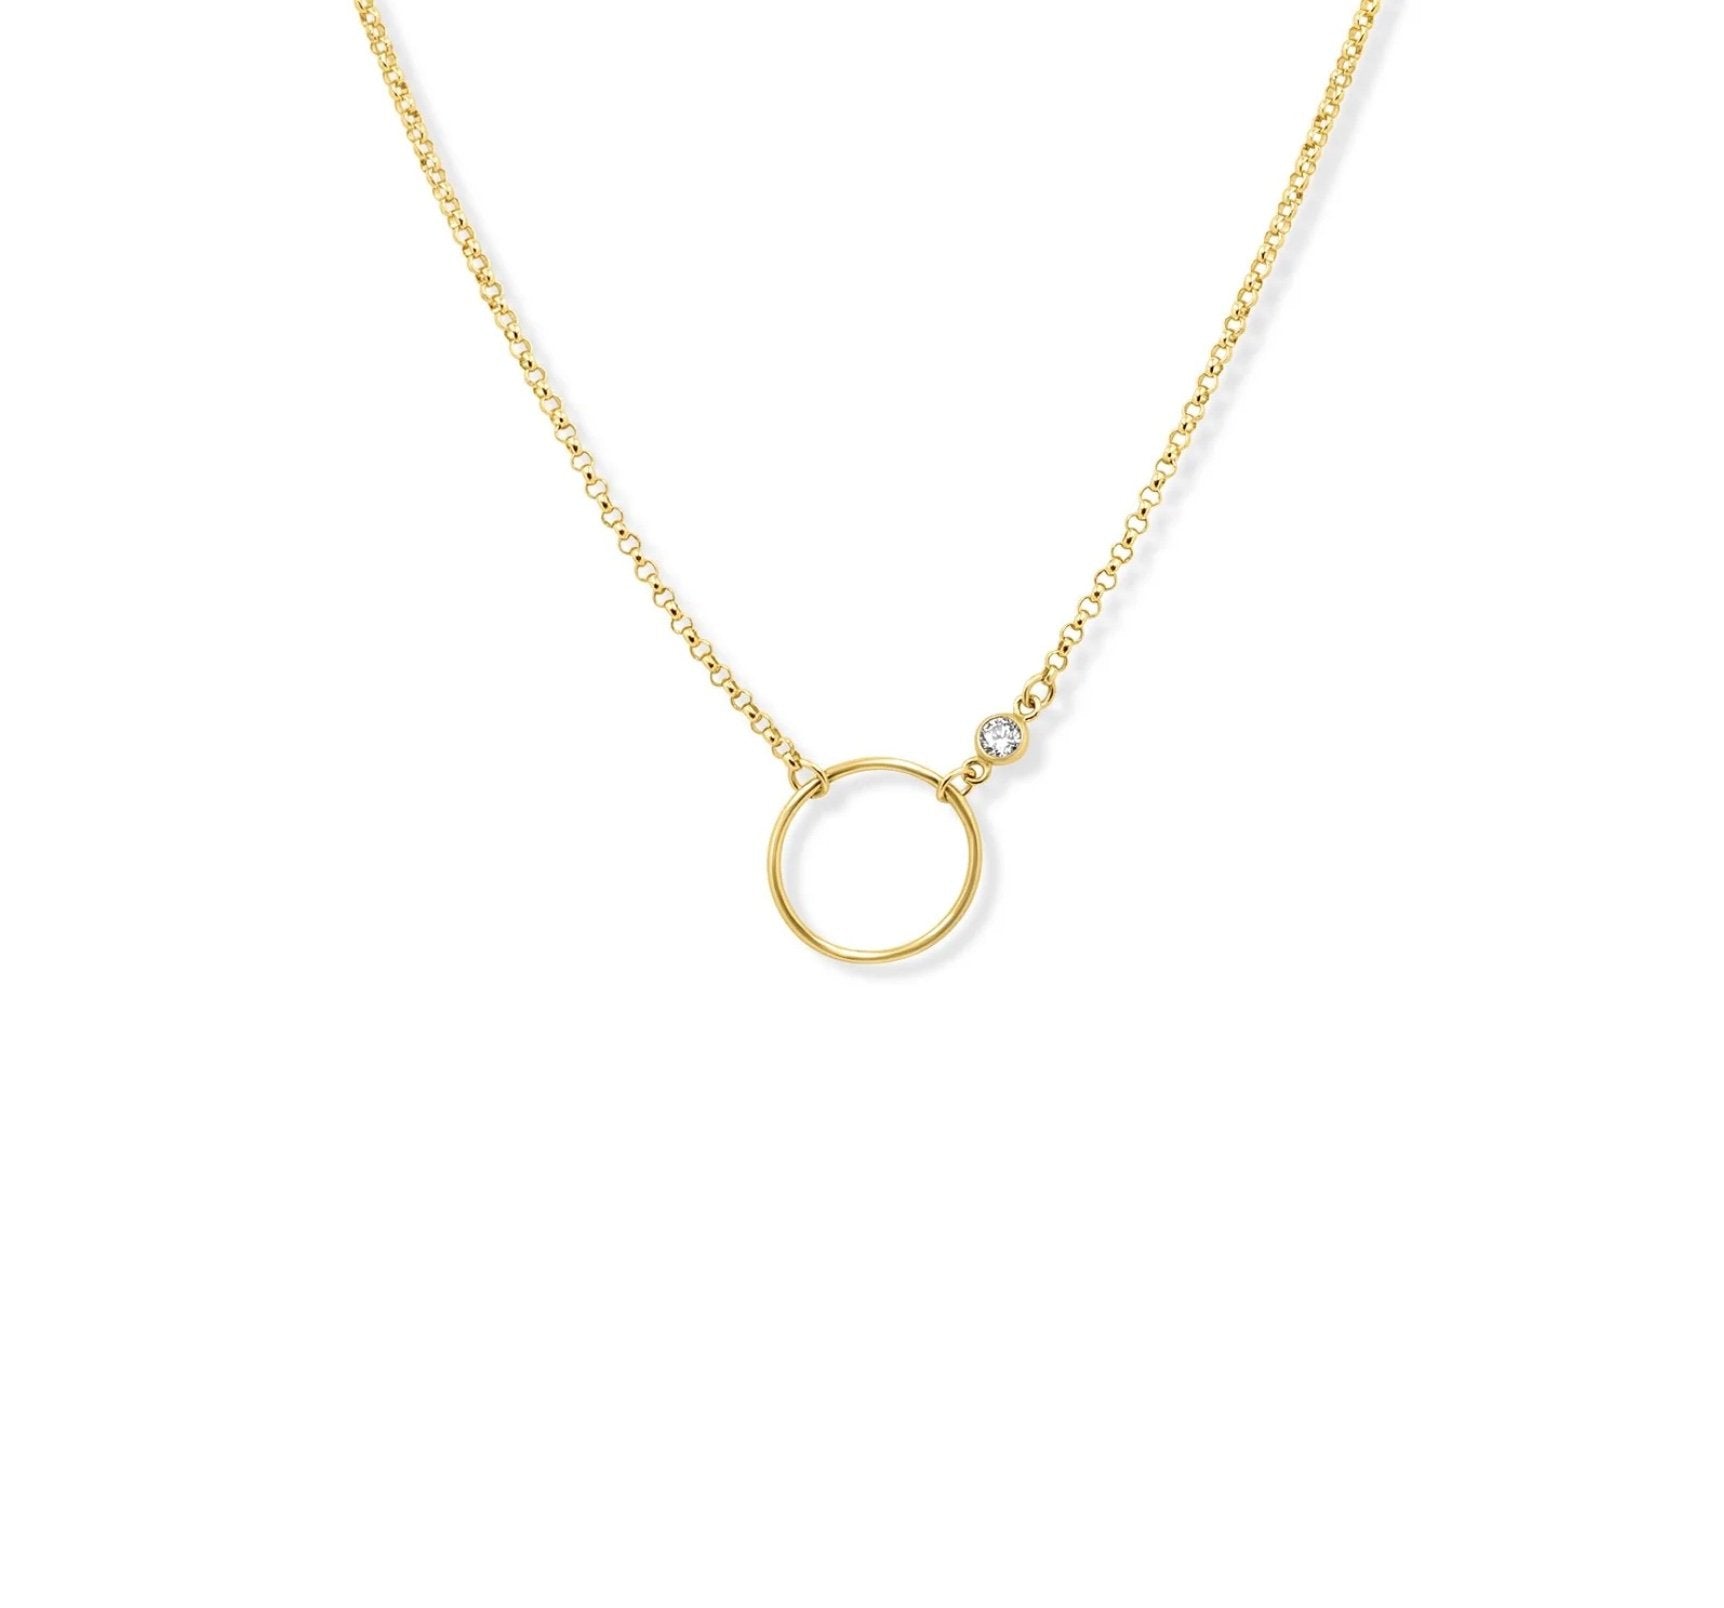 Gold filled circle necklace with cz stone on white background - Camille Jewelry